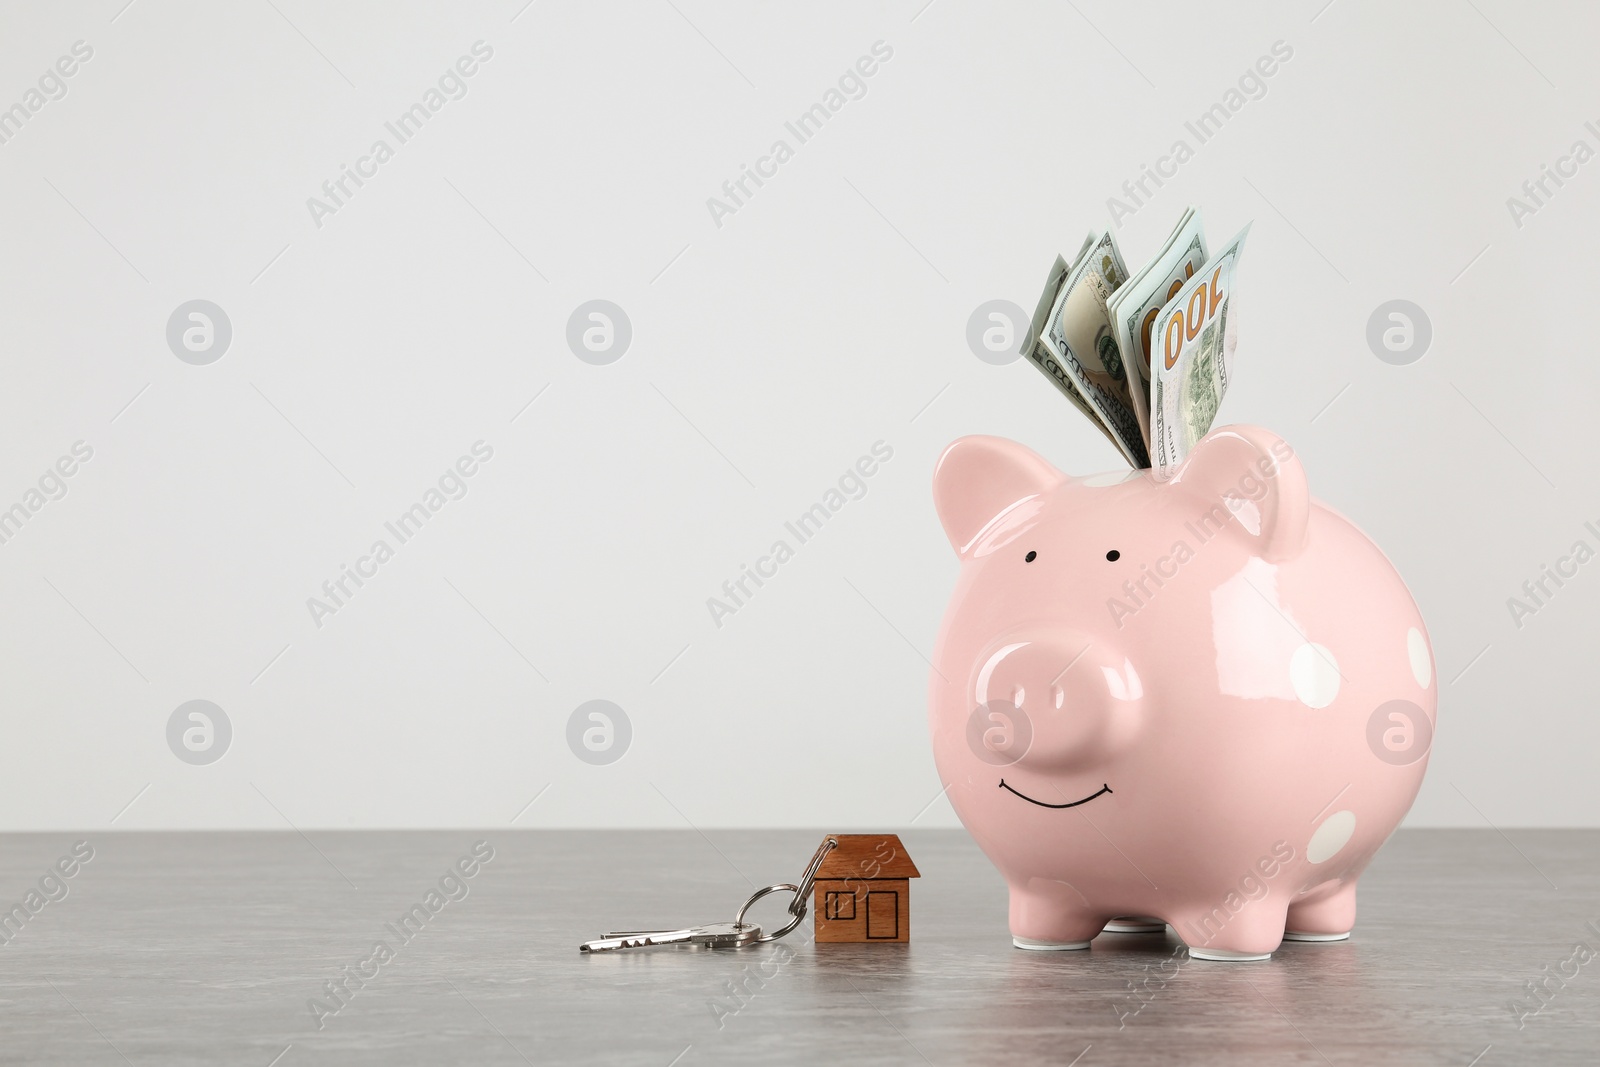 Photo of Piggy bank with dollar banknotes and house keys on table against white background. Space for text